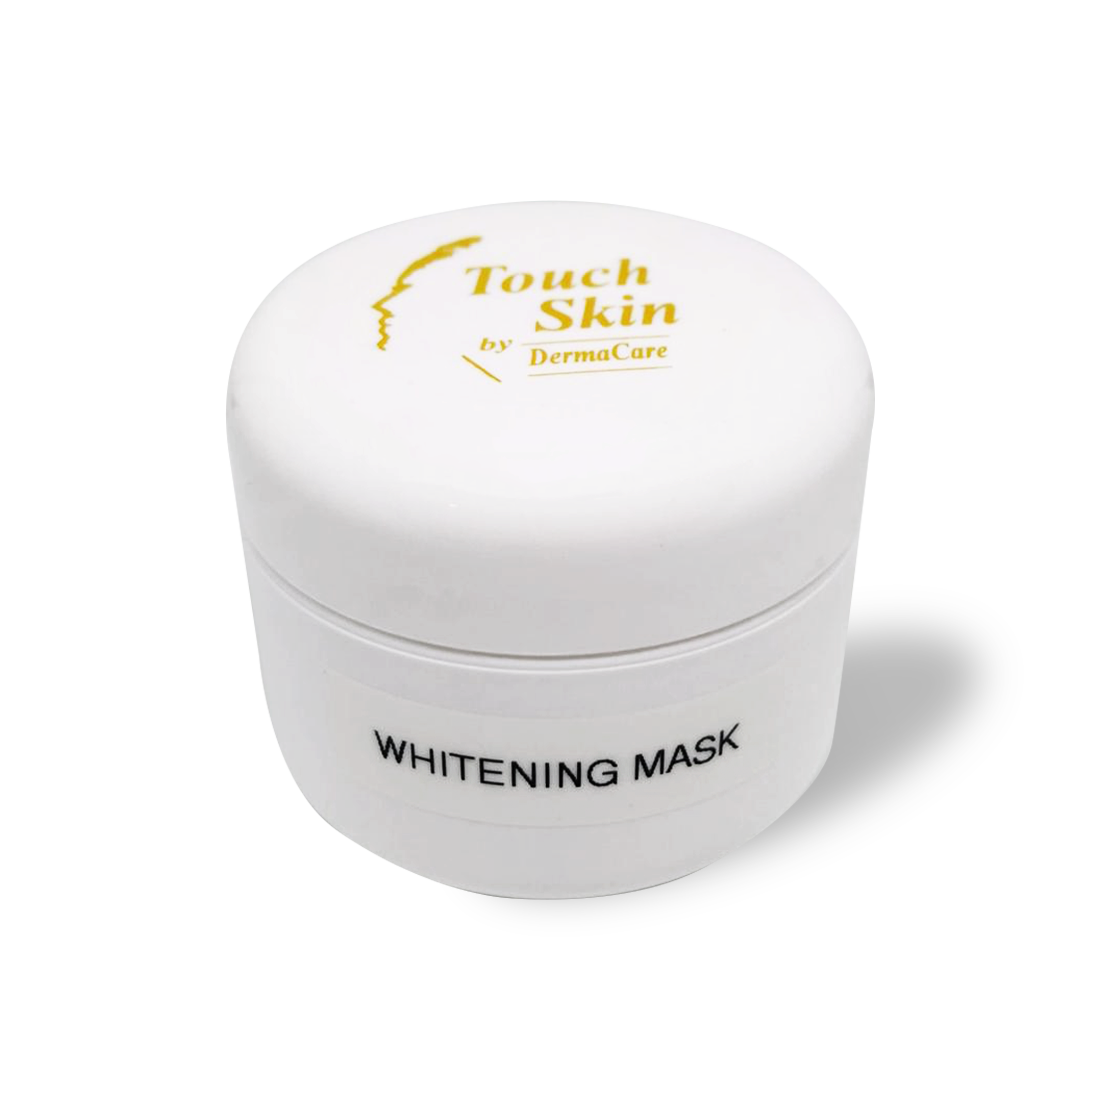 Whitening Mask - Dermacare Therapeutic Skincare